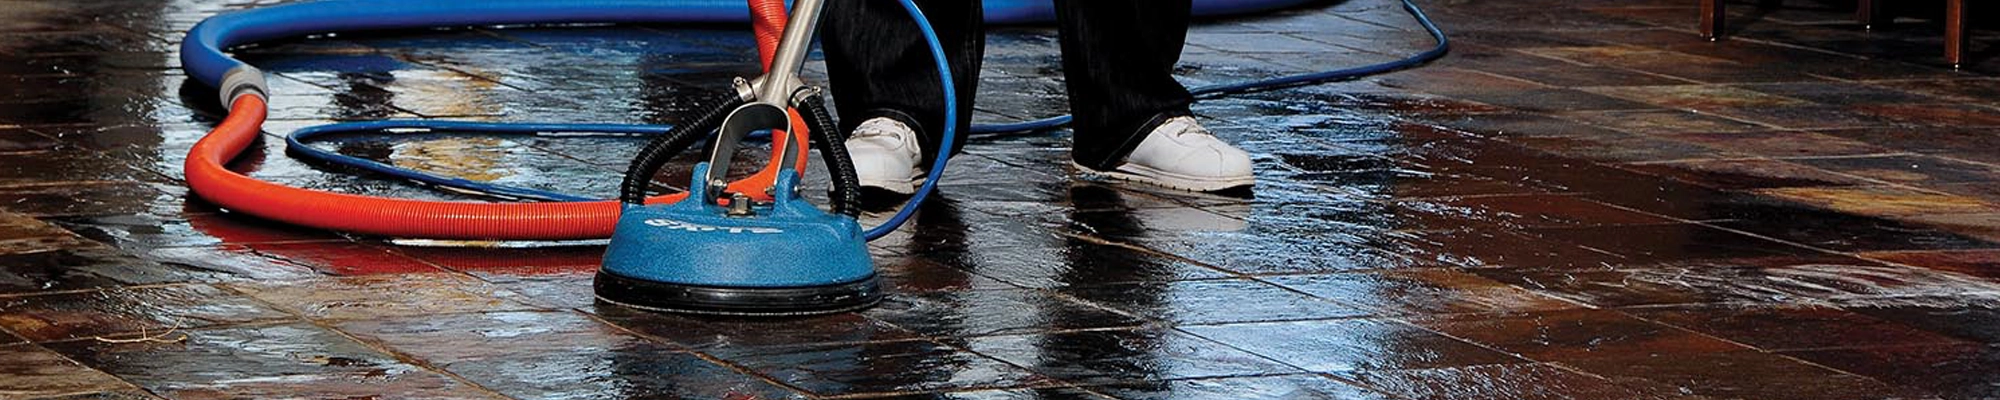 Cleaning and flooring maintenance services provided by Crown Carpet Colortile in Sun City West, AZ